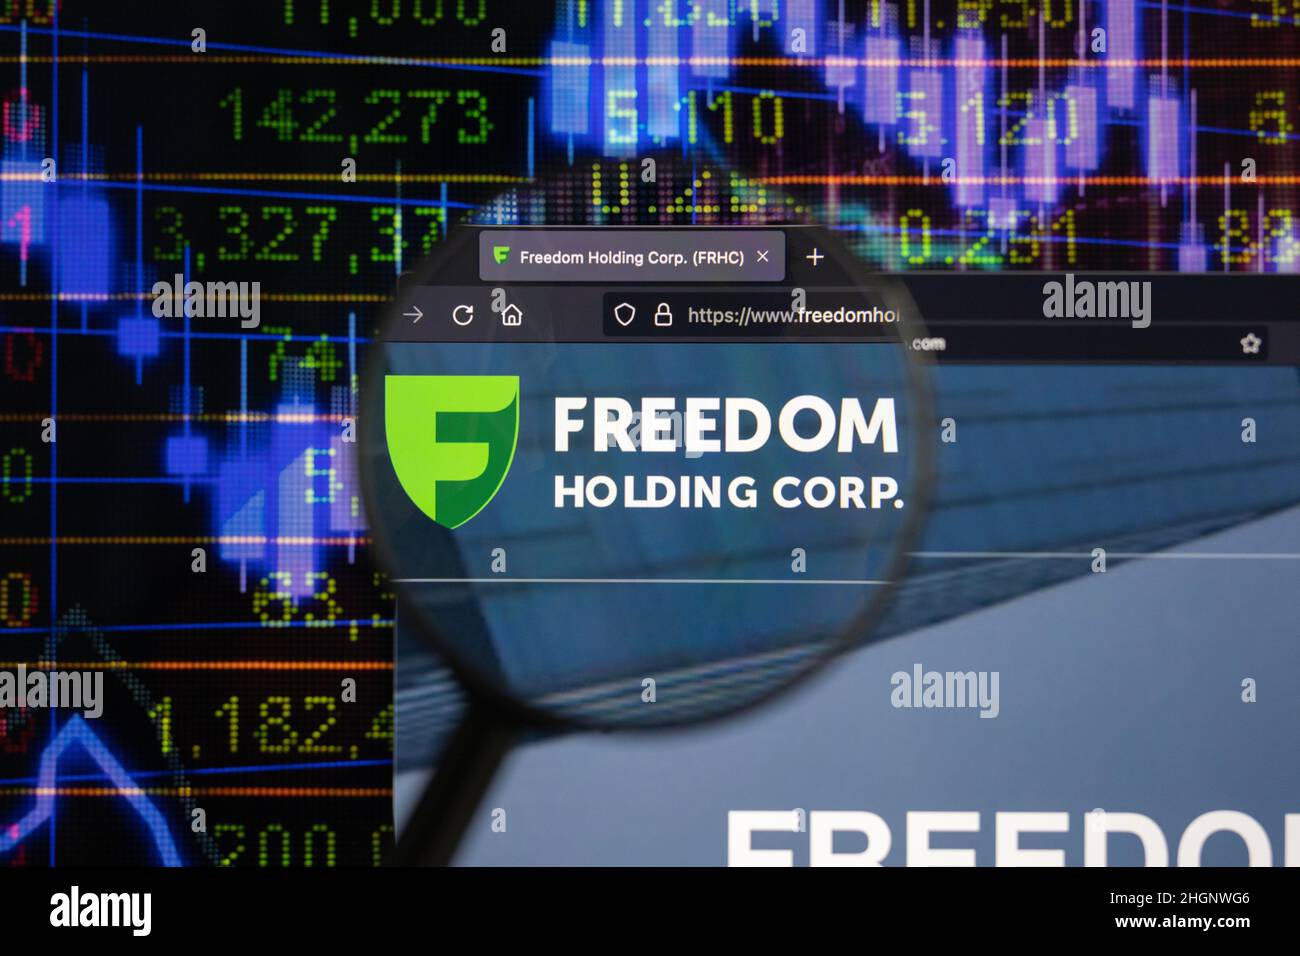 Freedom Holding Corp. company logo on a website with blurry stock market developments in the background, seen on a computer screen Stock Photo